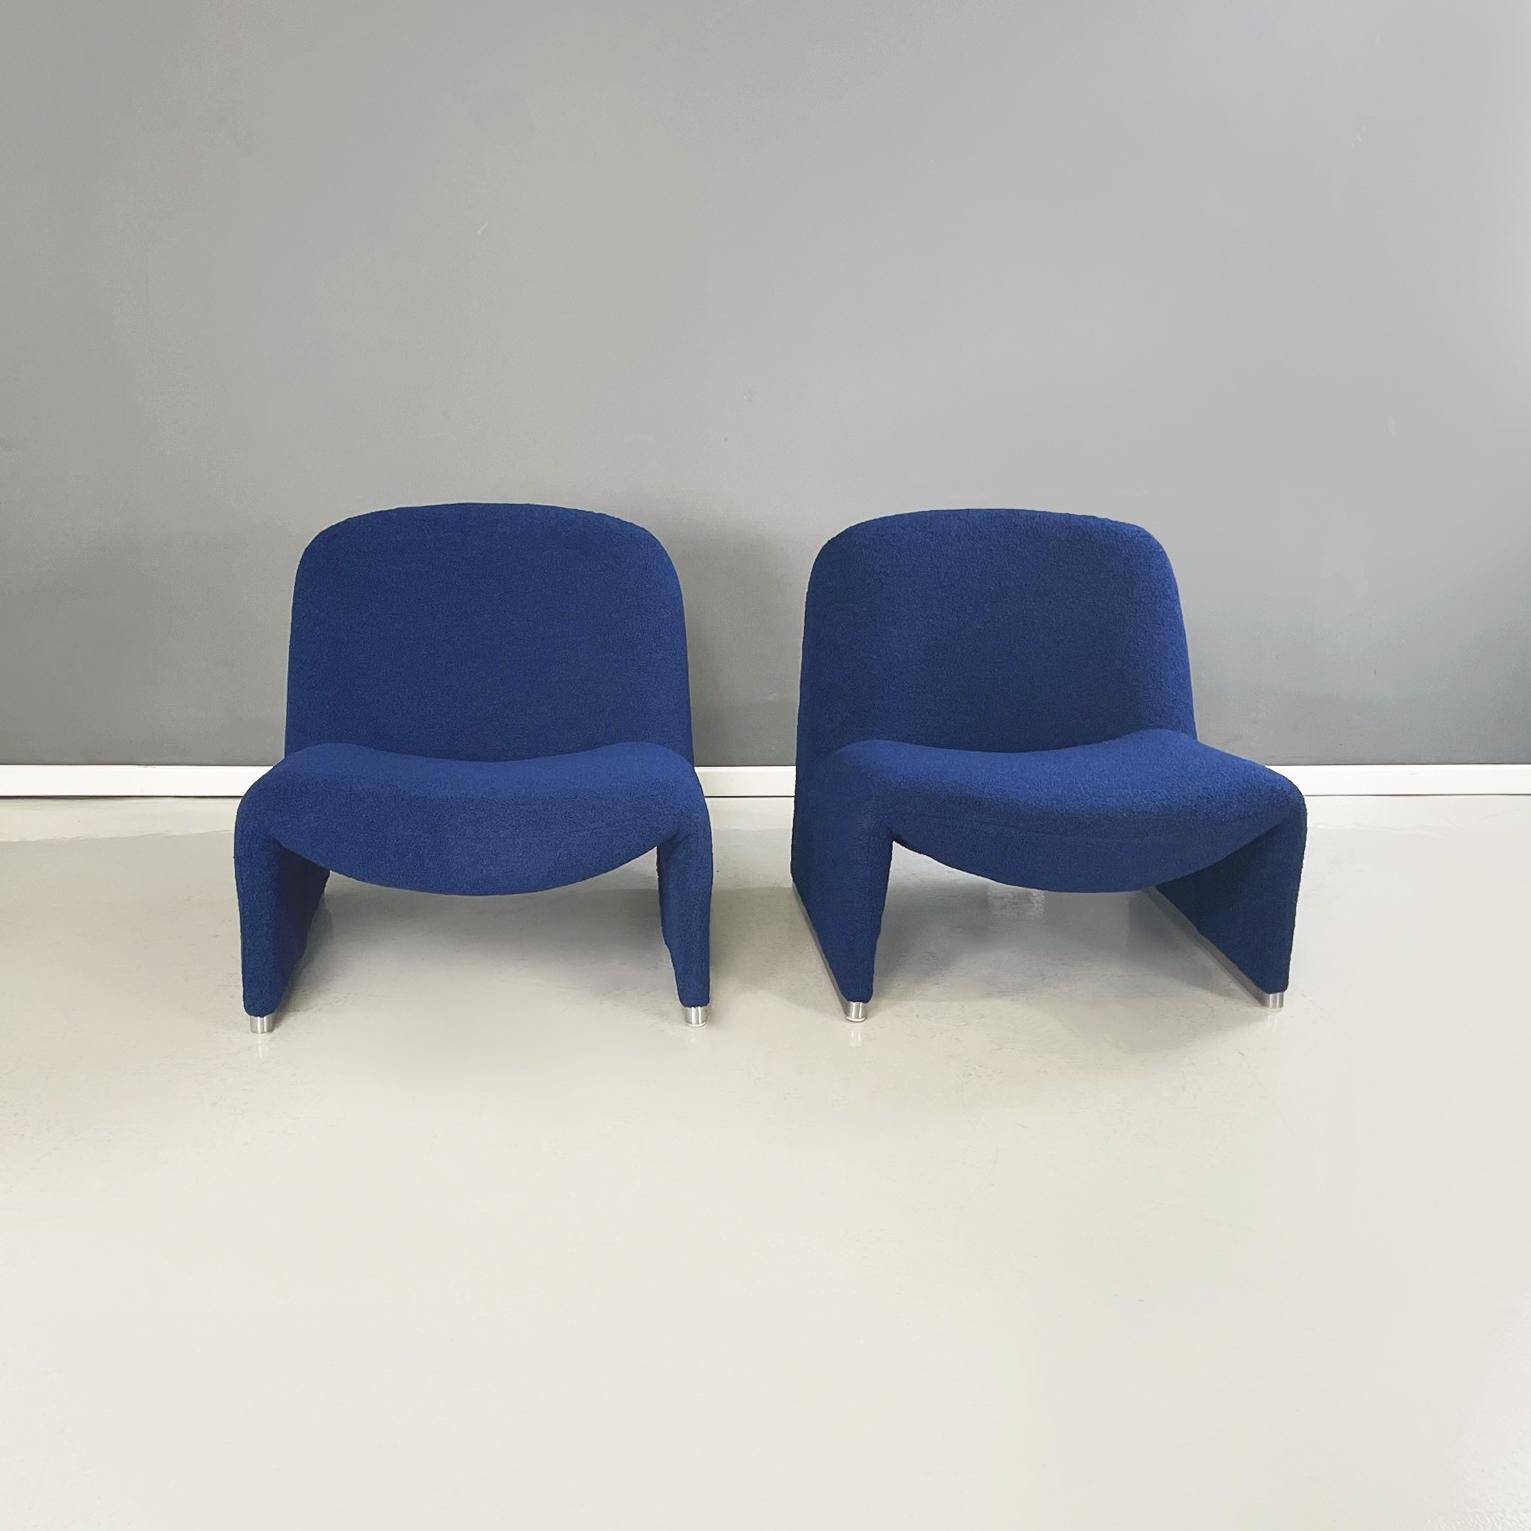 Modern Italian modern Blue fabric Armchairs Alky by Piretti for Anonima Castelli, 1970s For Sale